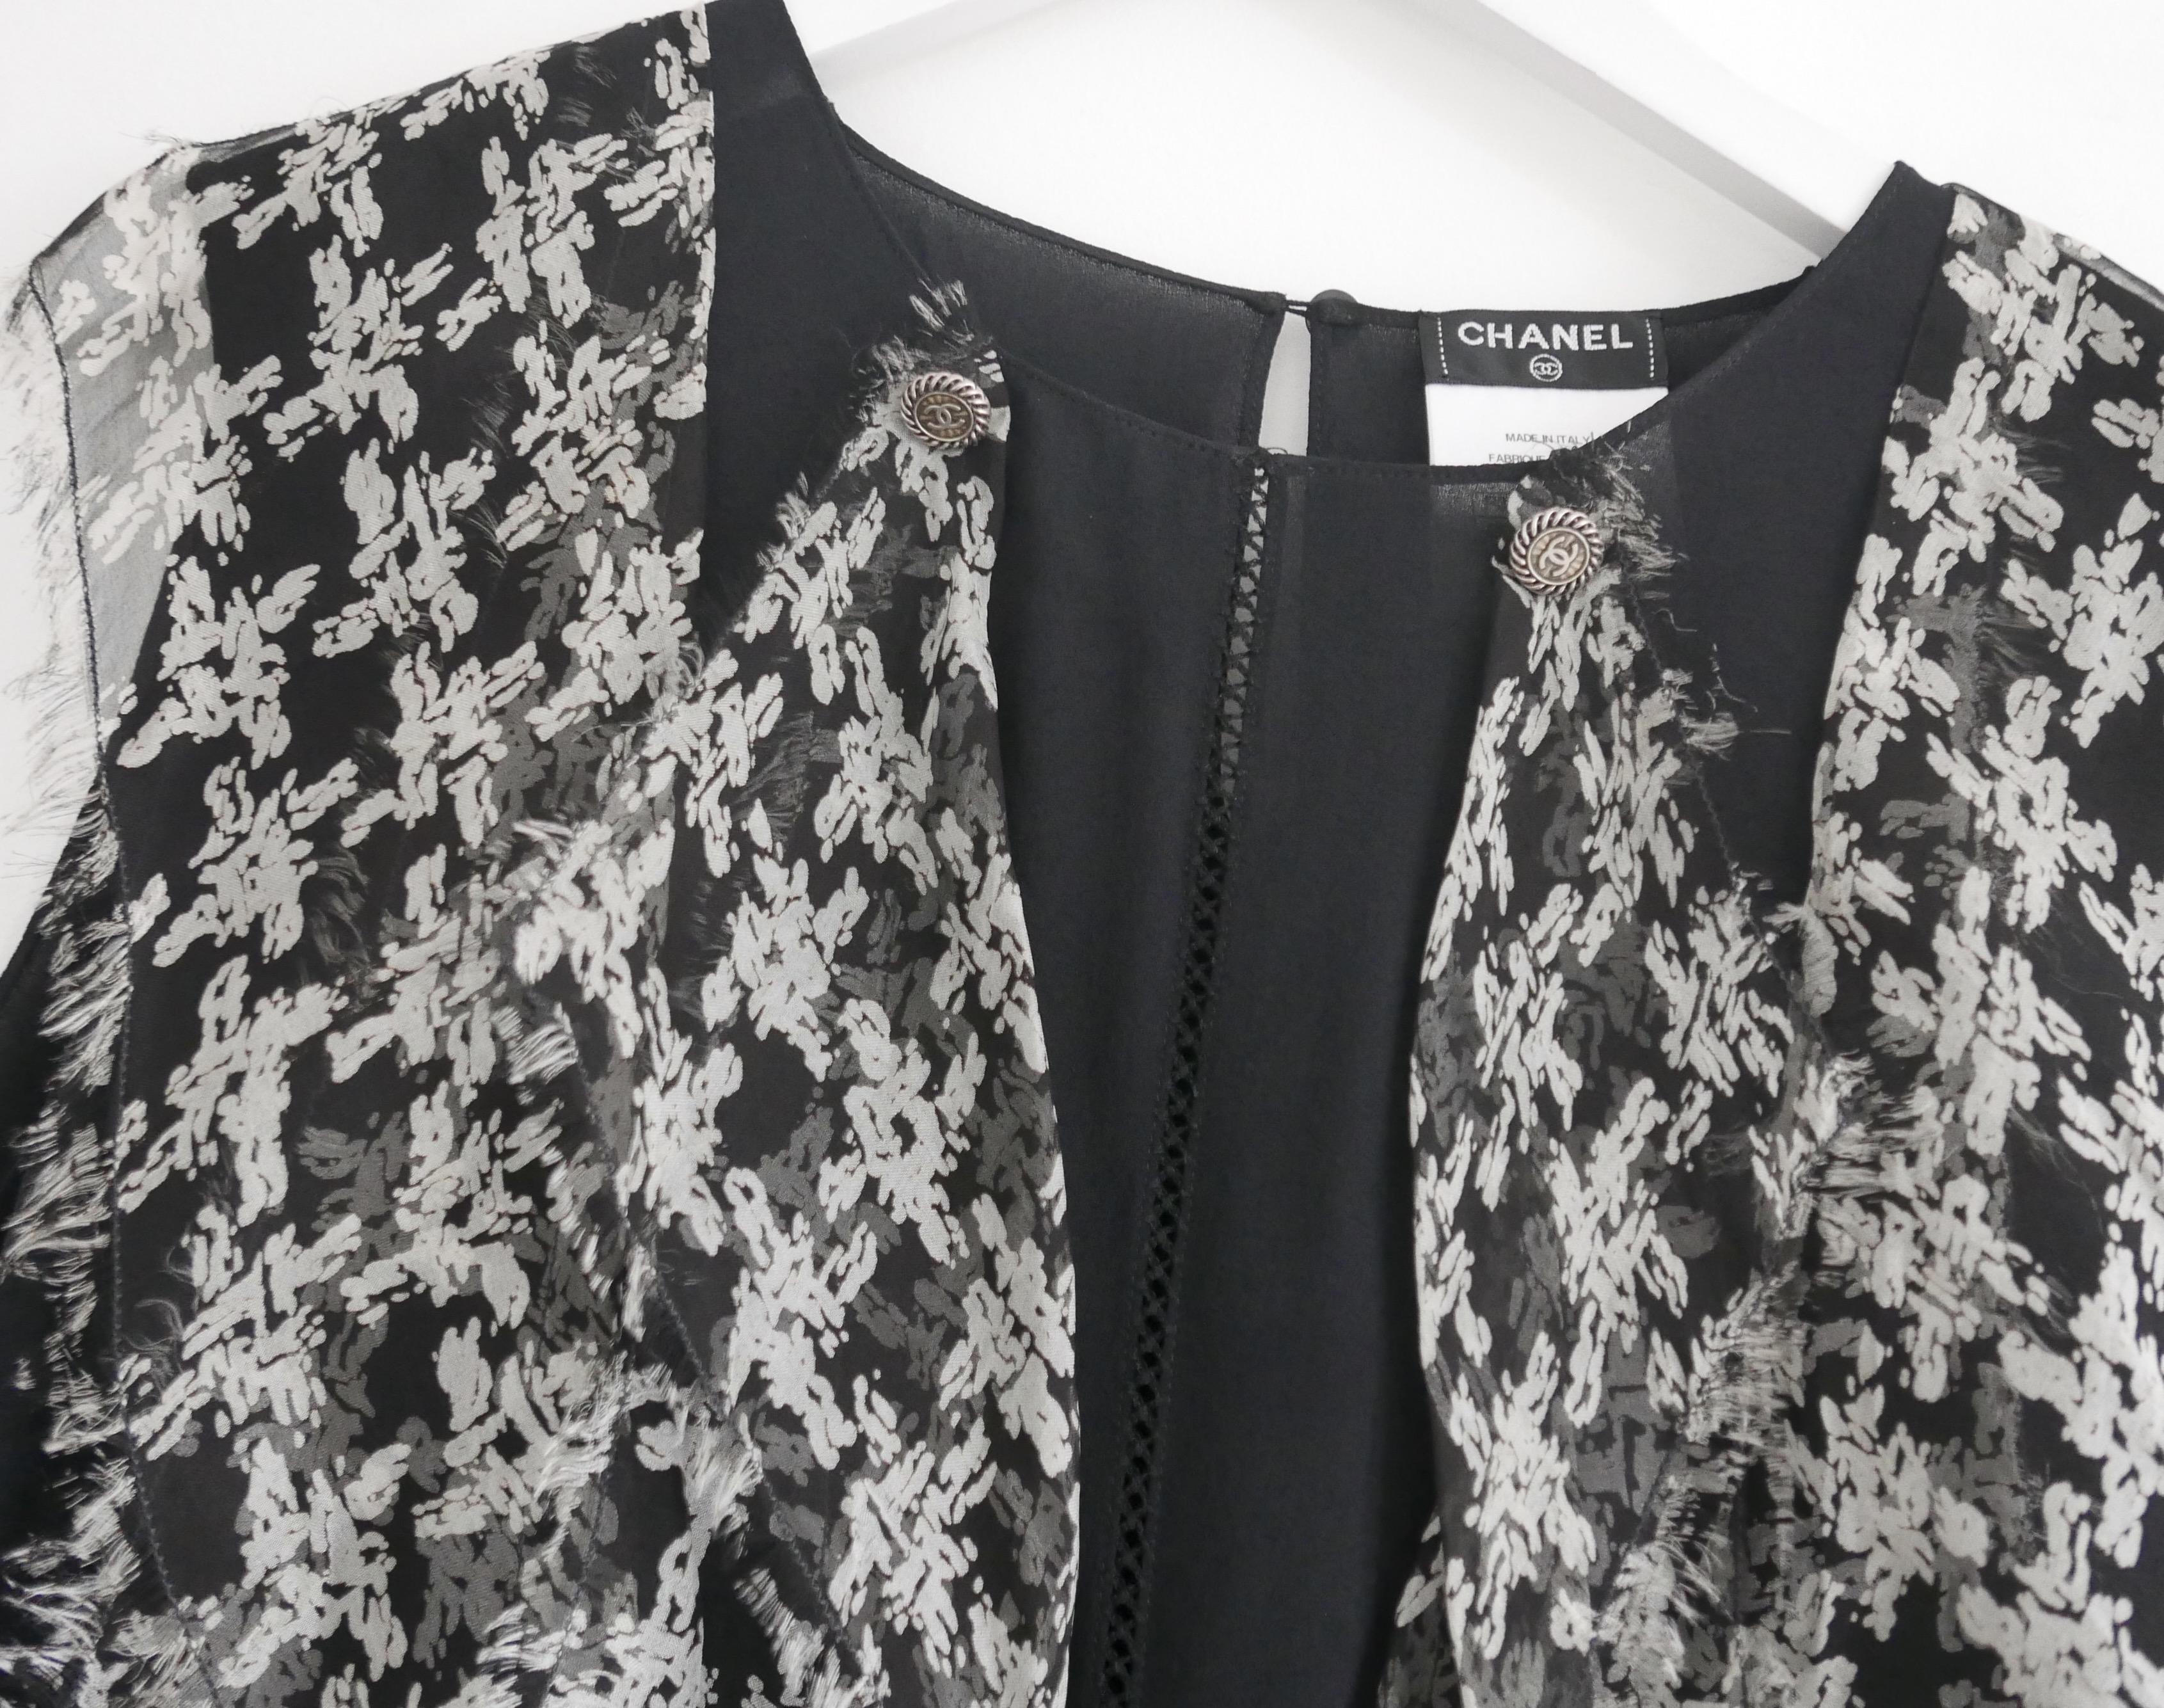 Gorgeous Chanel blouse from the Spring 2010 Collection. Unworn.
Made from matte black silk with frothy, raw edged houndstooth print silk ruffles to the front. It has thin ladder weave detail to centre front, silvertone metal and clear resin CC